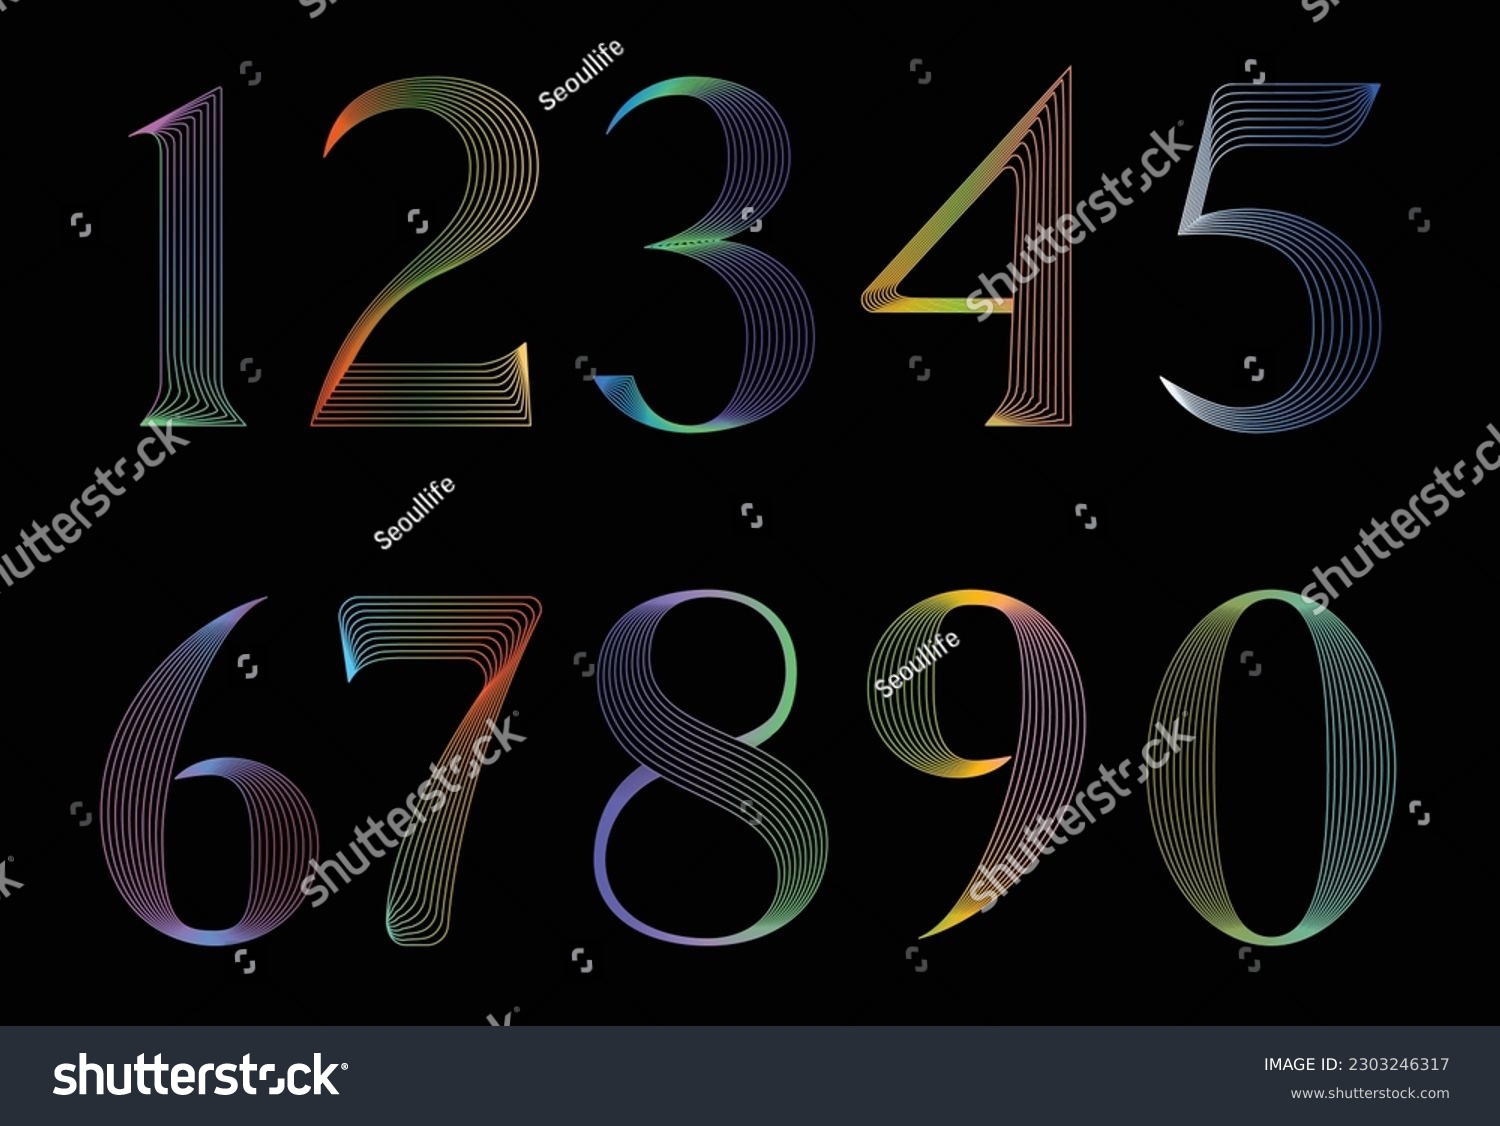 SVG of striped colorful sanserif numbers 1234567890 svg